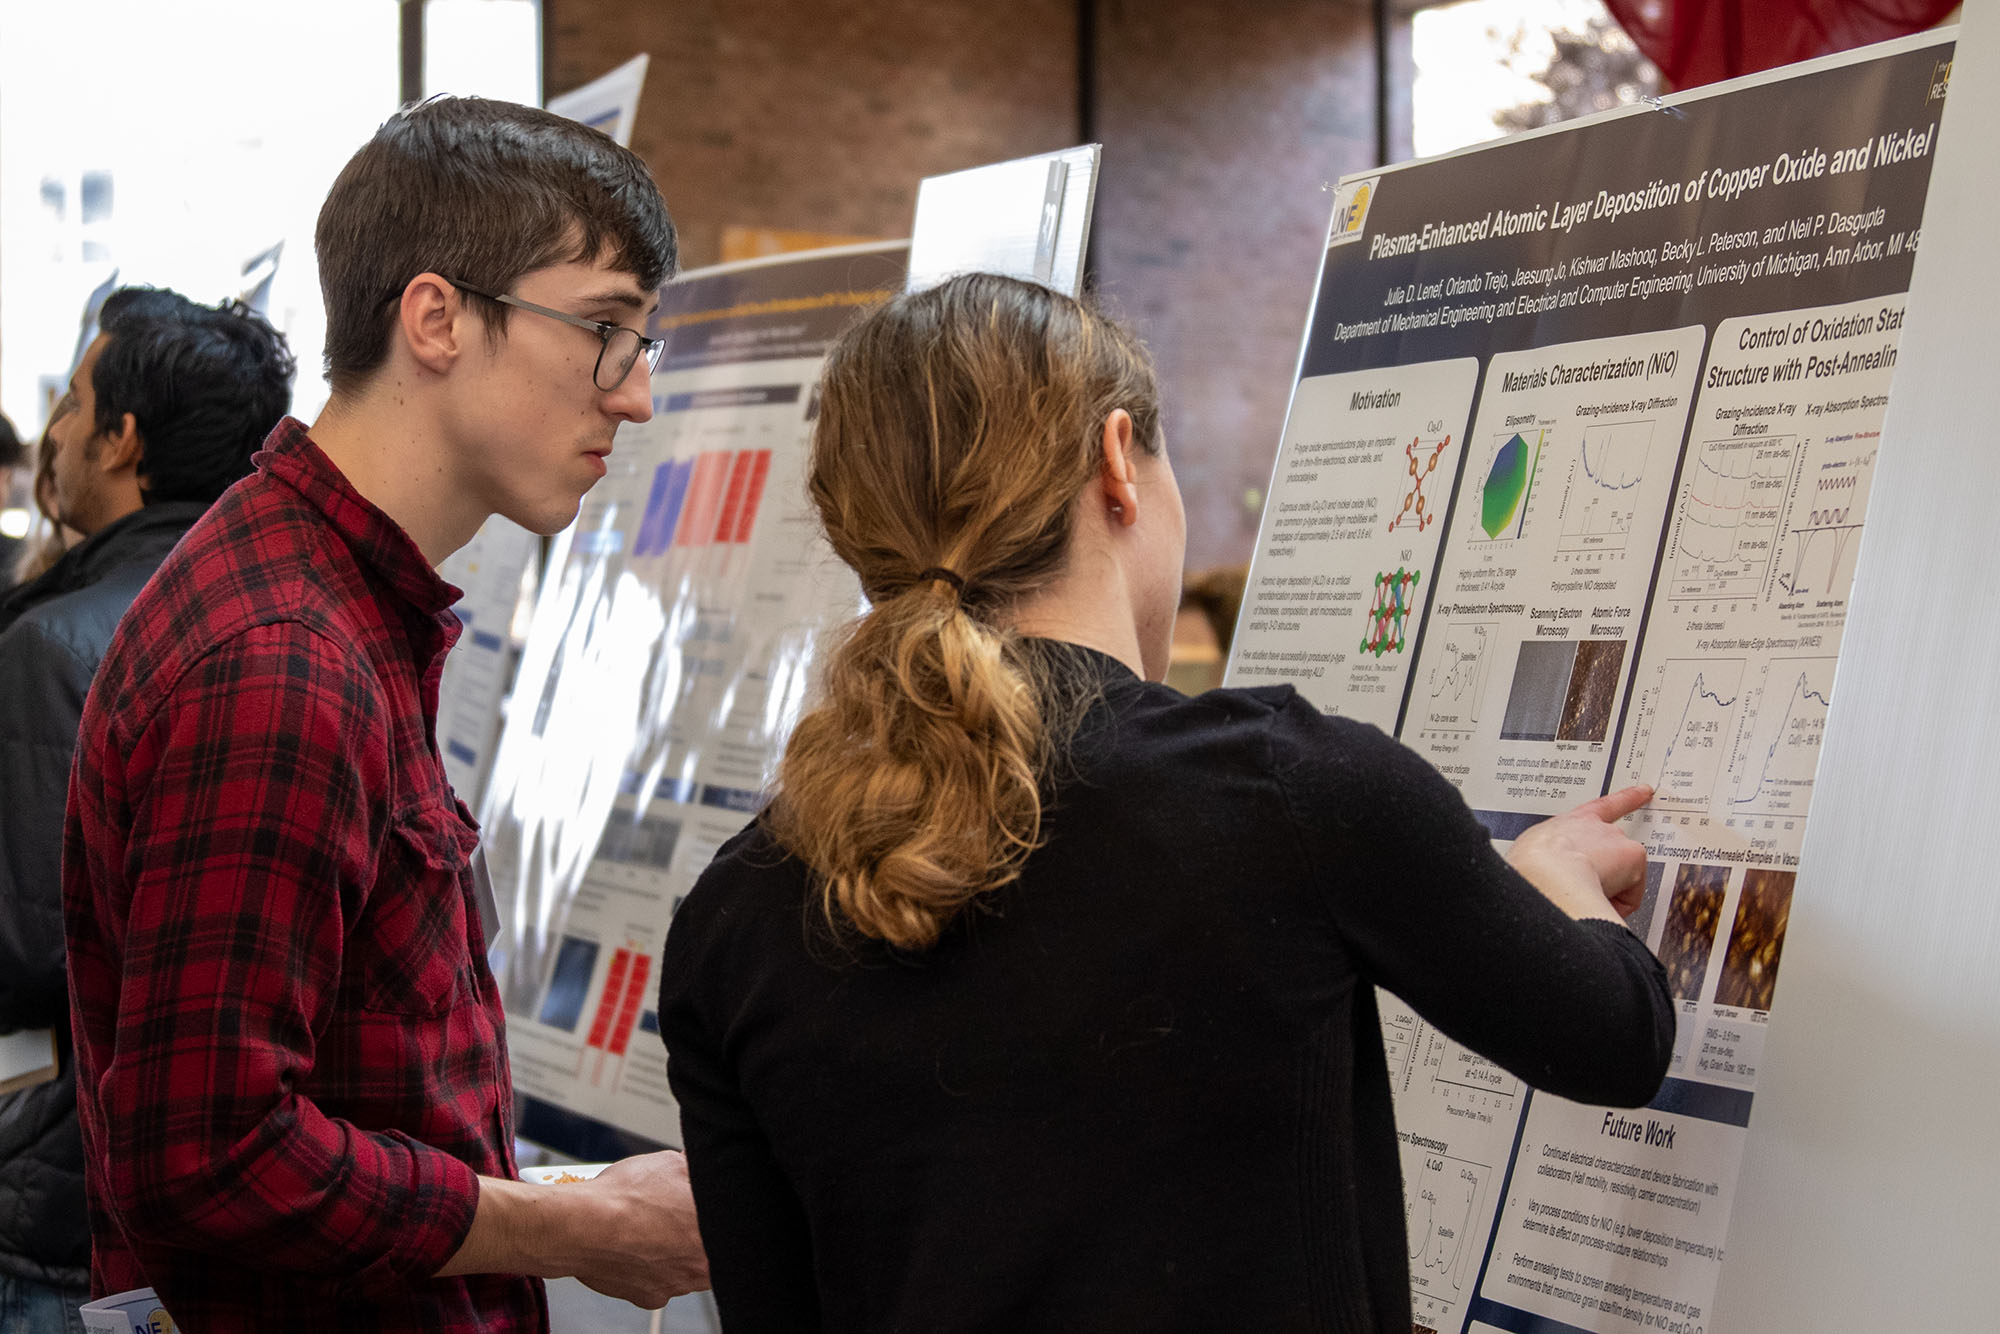 Two students examine a poster during the symposium